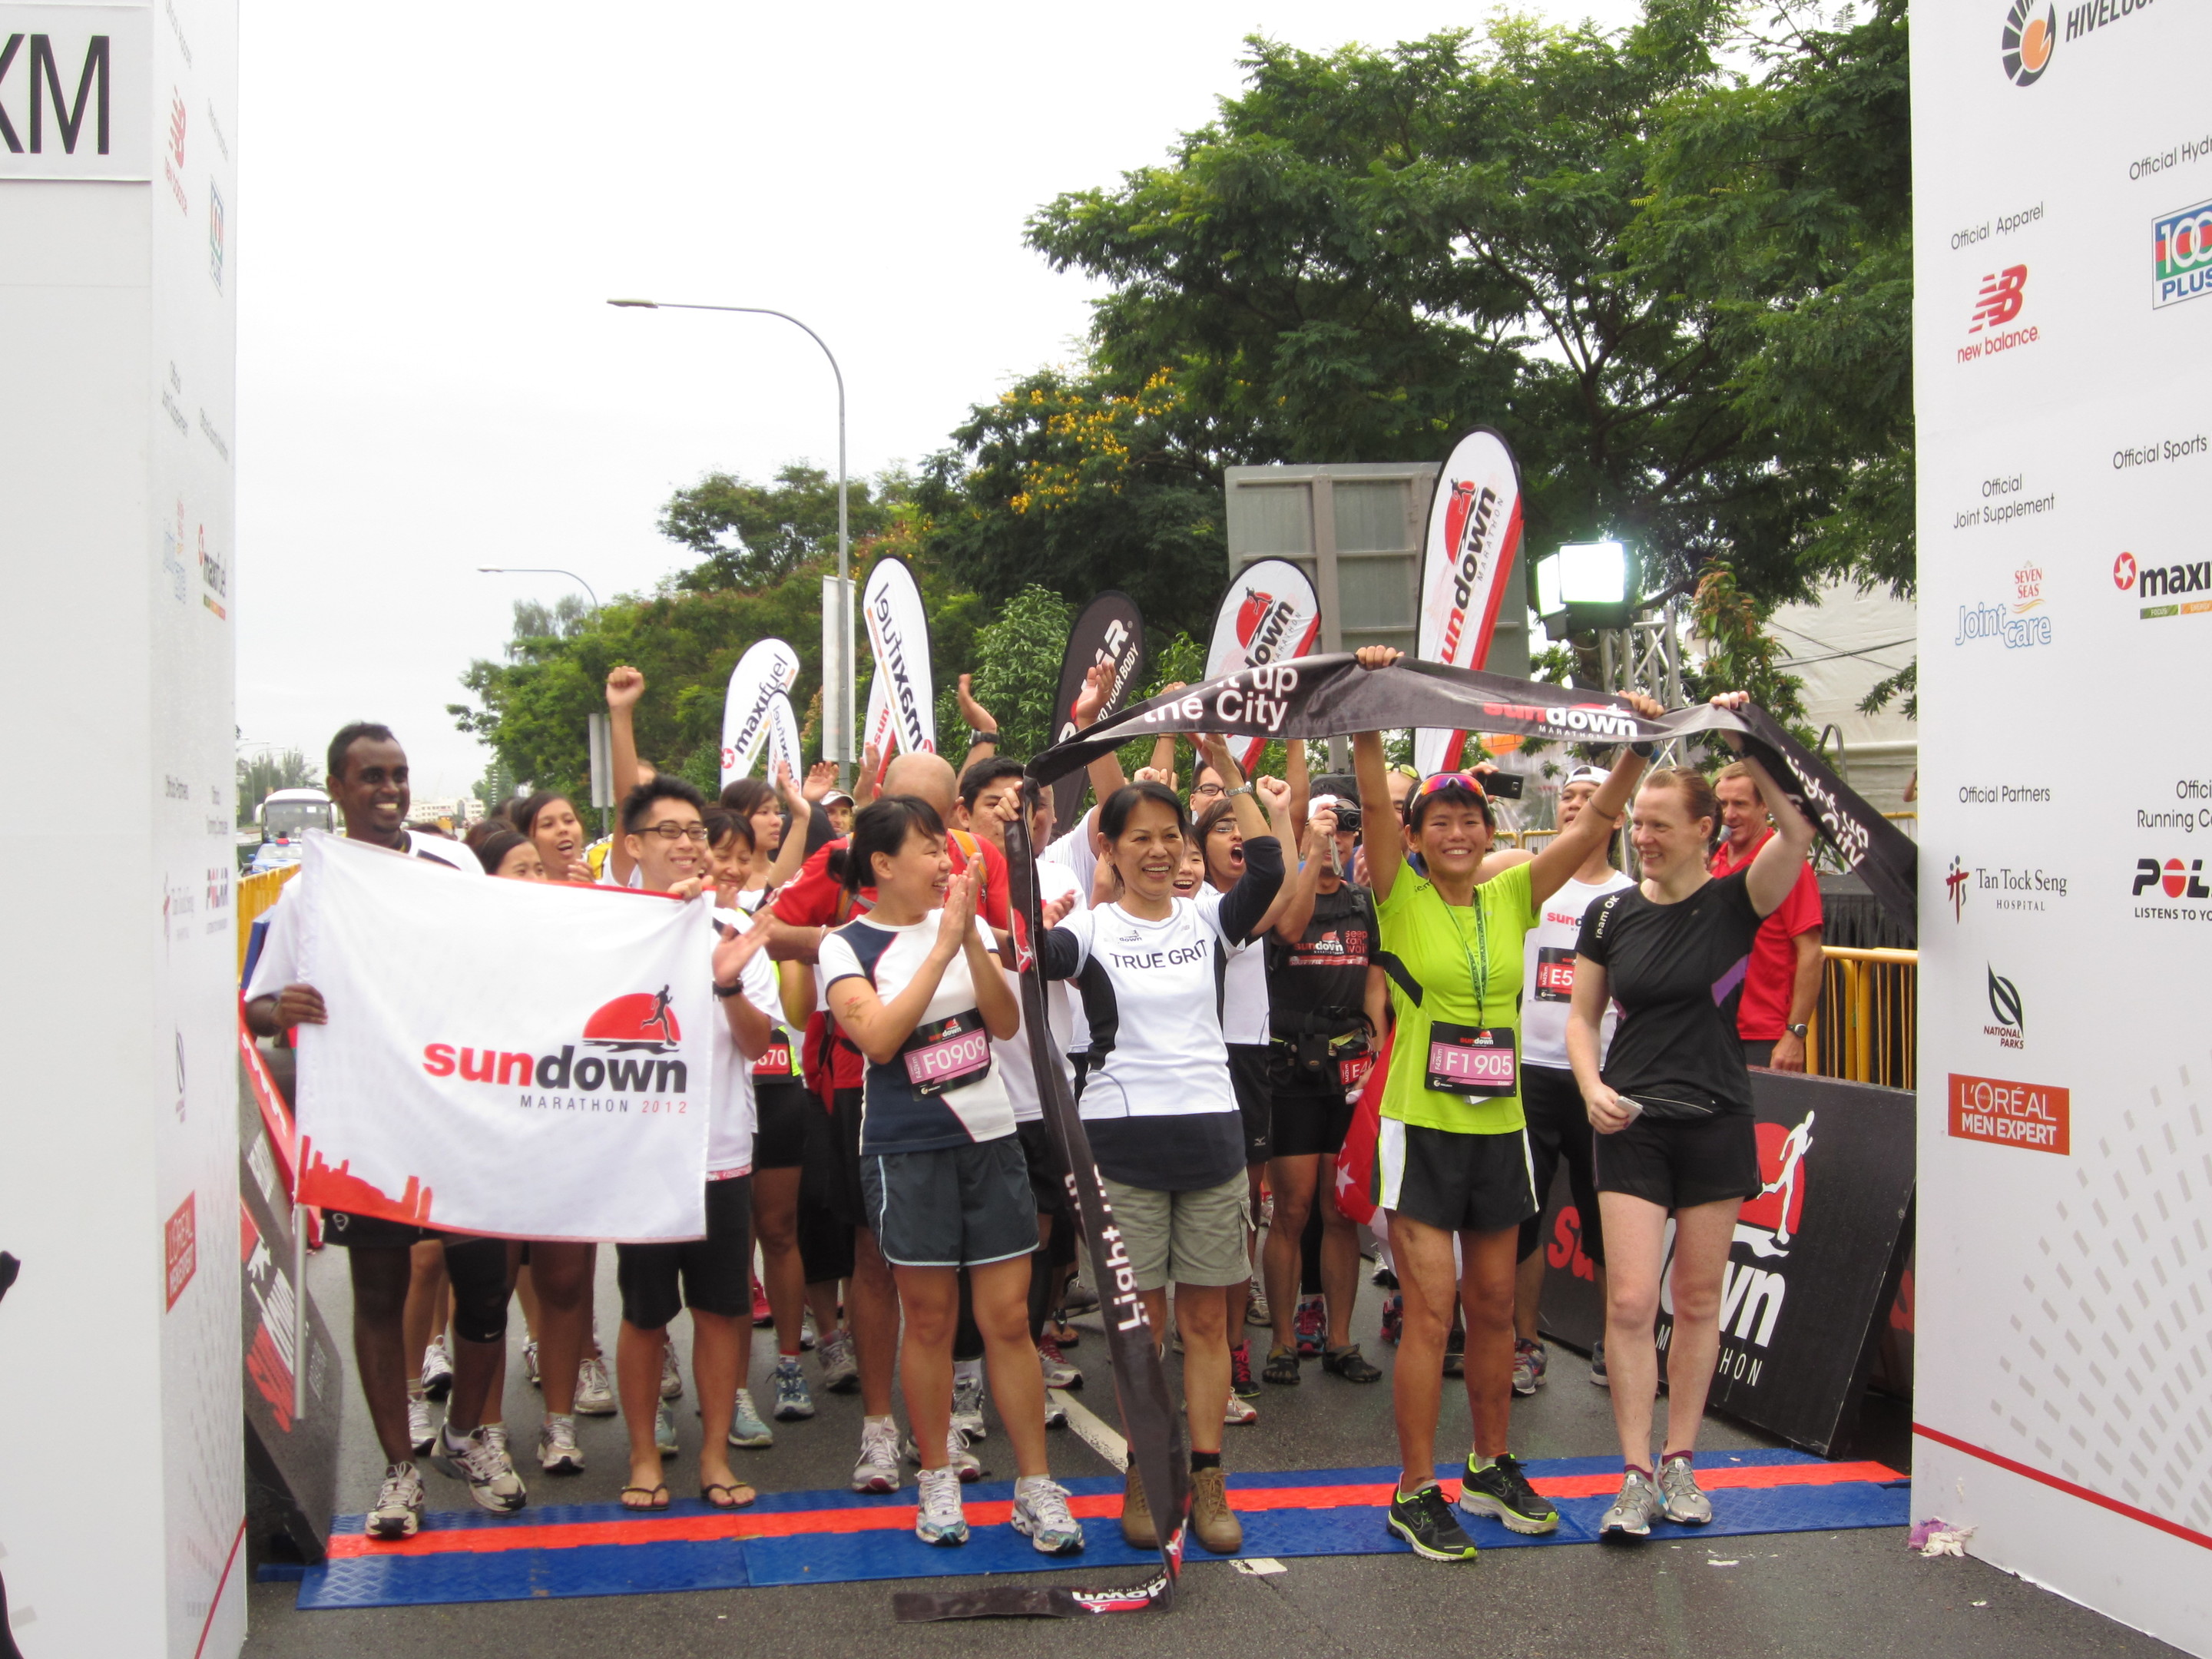 Kirsten (in green T-shirt, second right) and Orla (far right) celebrate the end of Kirsten’s first ‘race’ after her accident: the Singapore Sundown Marathon in 2012, which took her 10 ½ hours to walk.